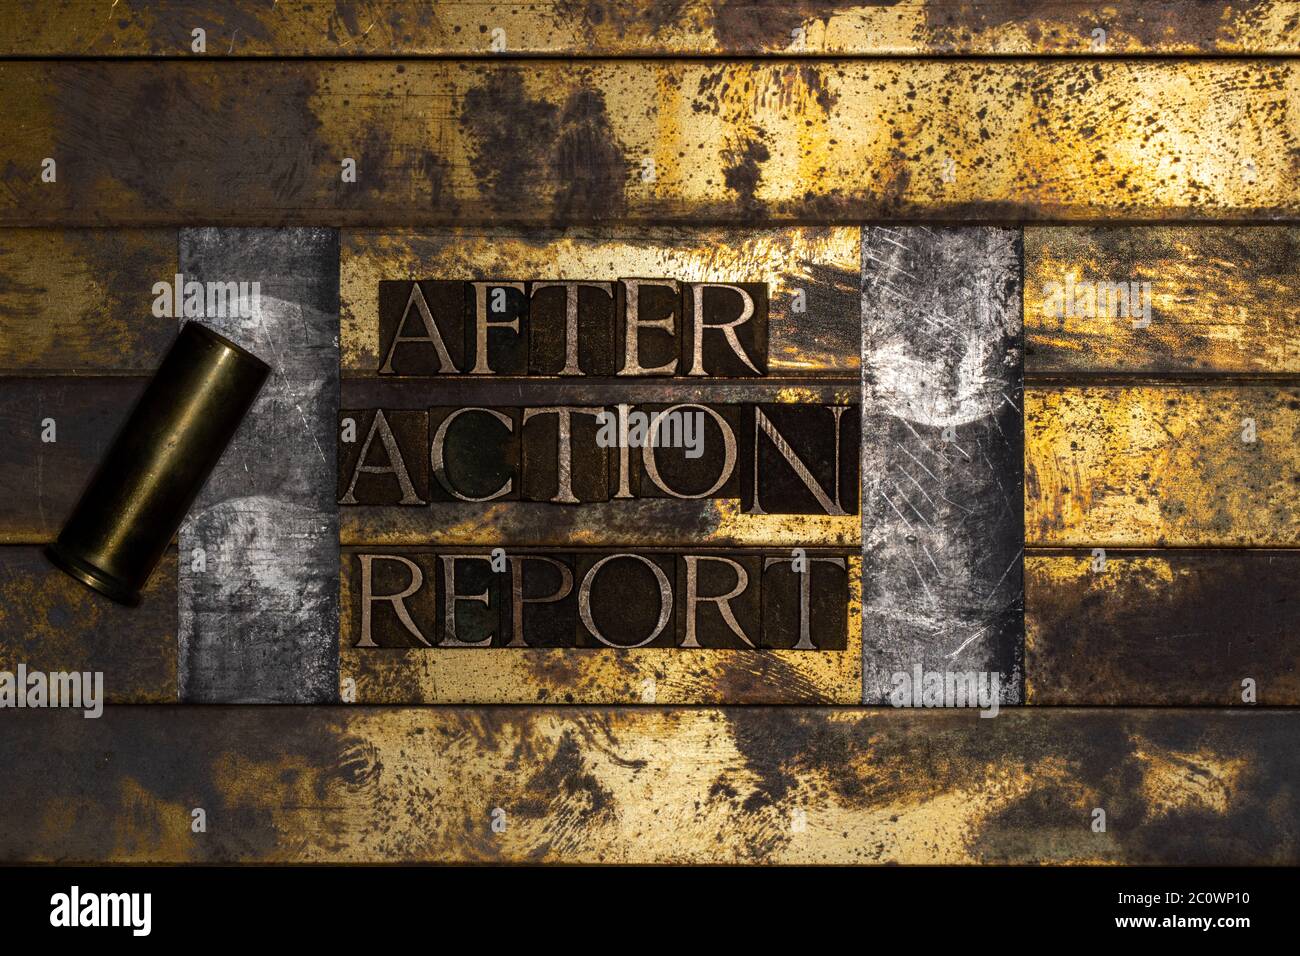 Photo of real authentic typeset letters forming After Action Report text with bullet casing on vintage textured silver grunge copper and gold Stock Photo